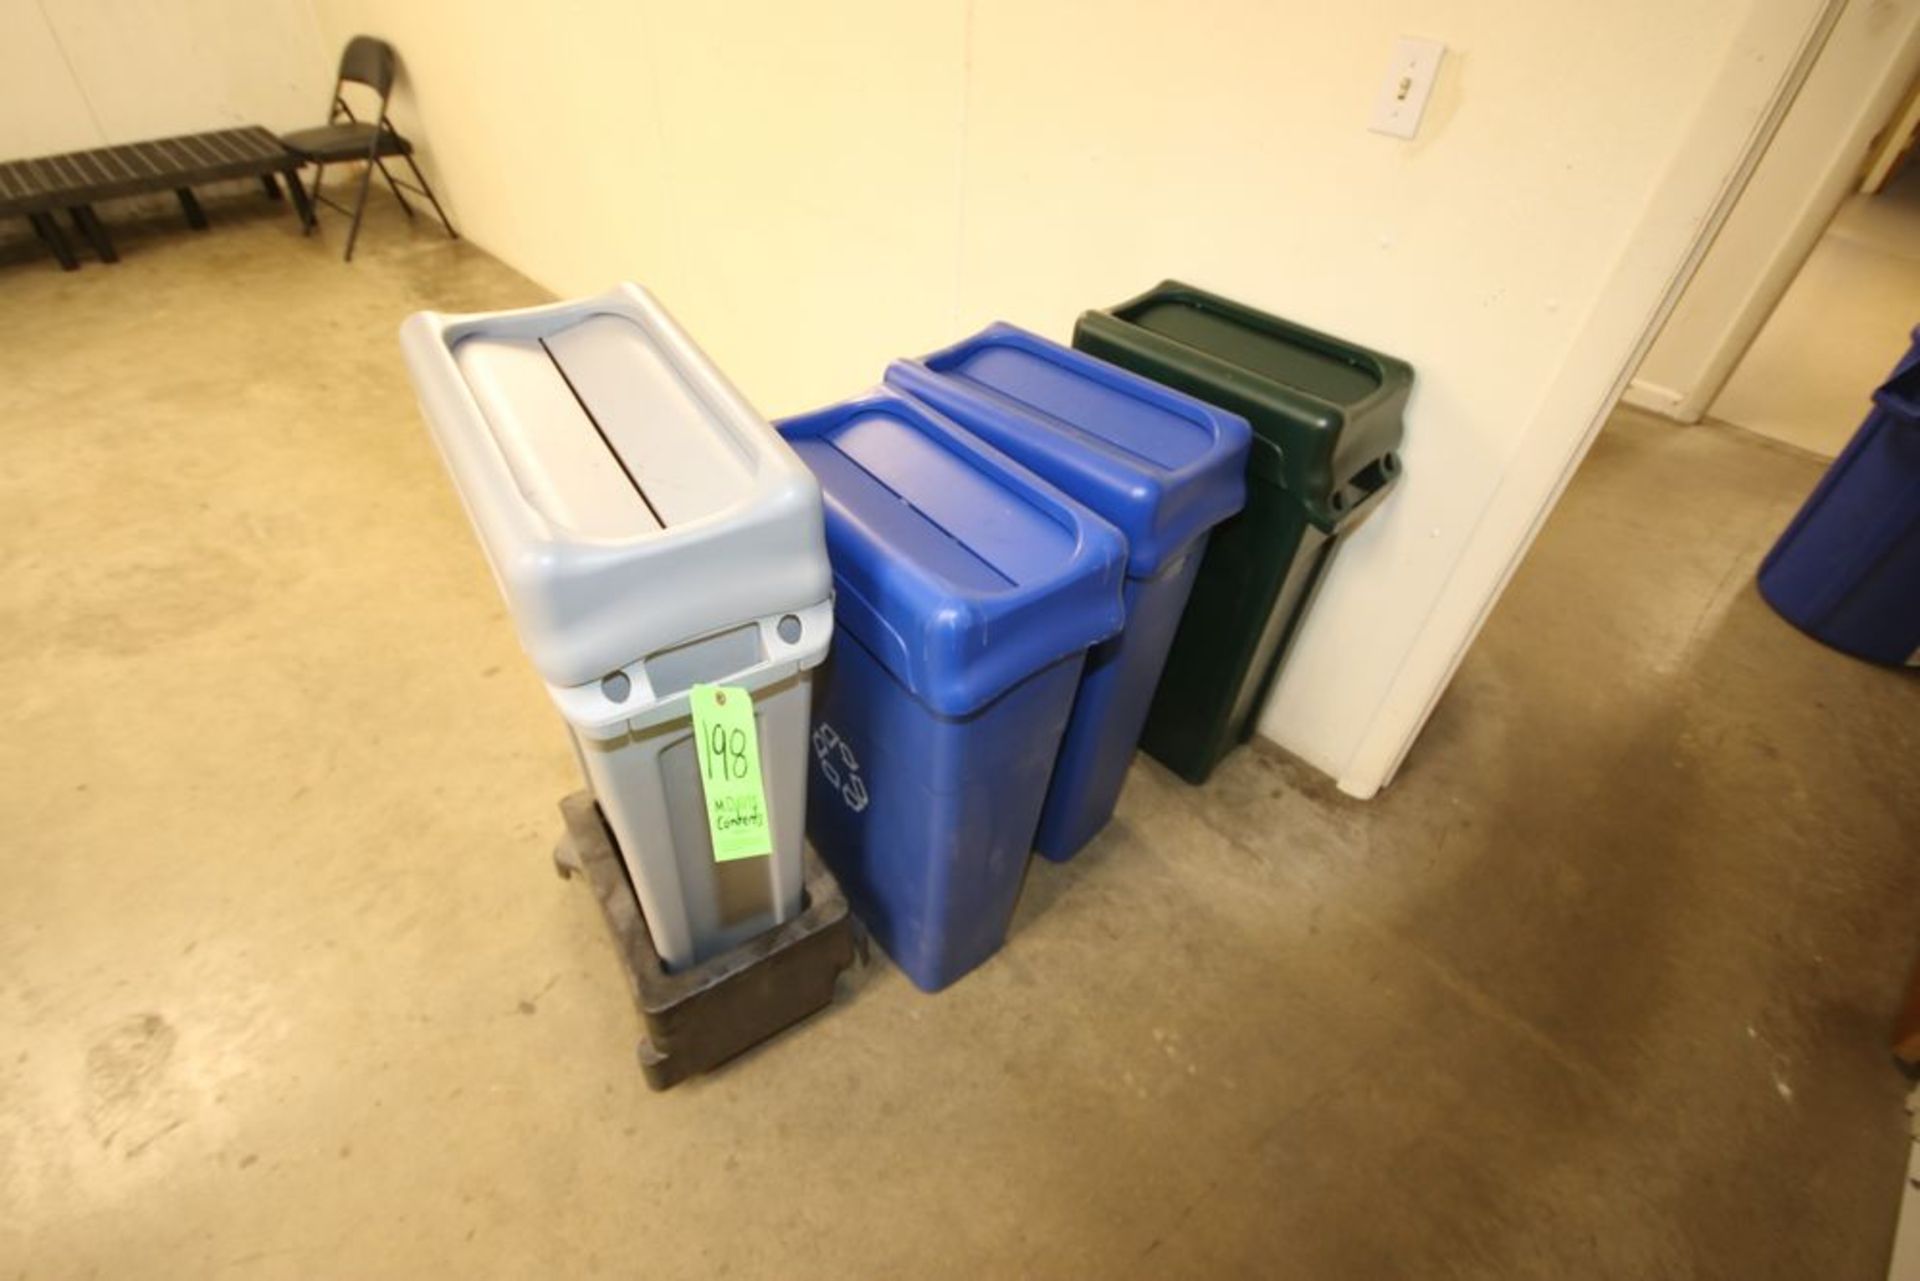 Lot of Assorted Trash & Recycling Bins, (1) on Portable Scooter, with (3) Plastic Dunnage Racks with